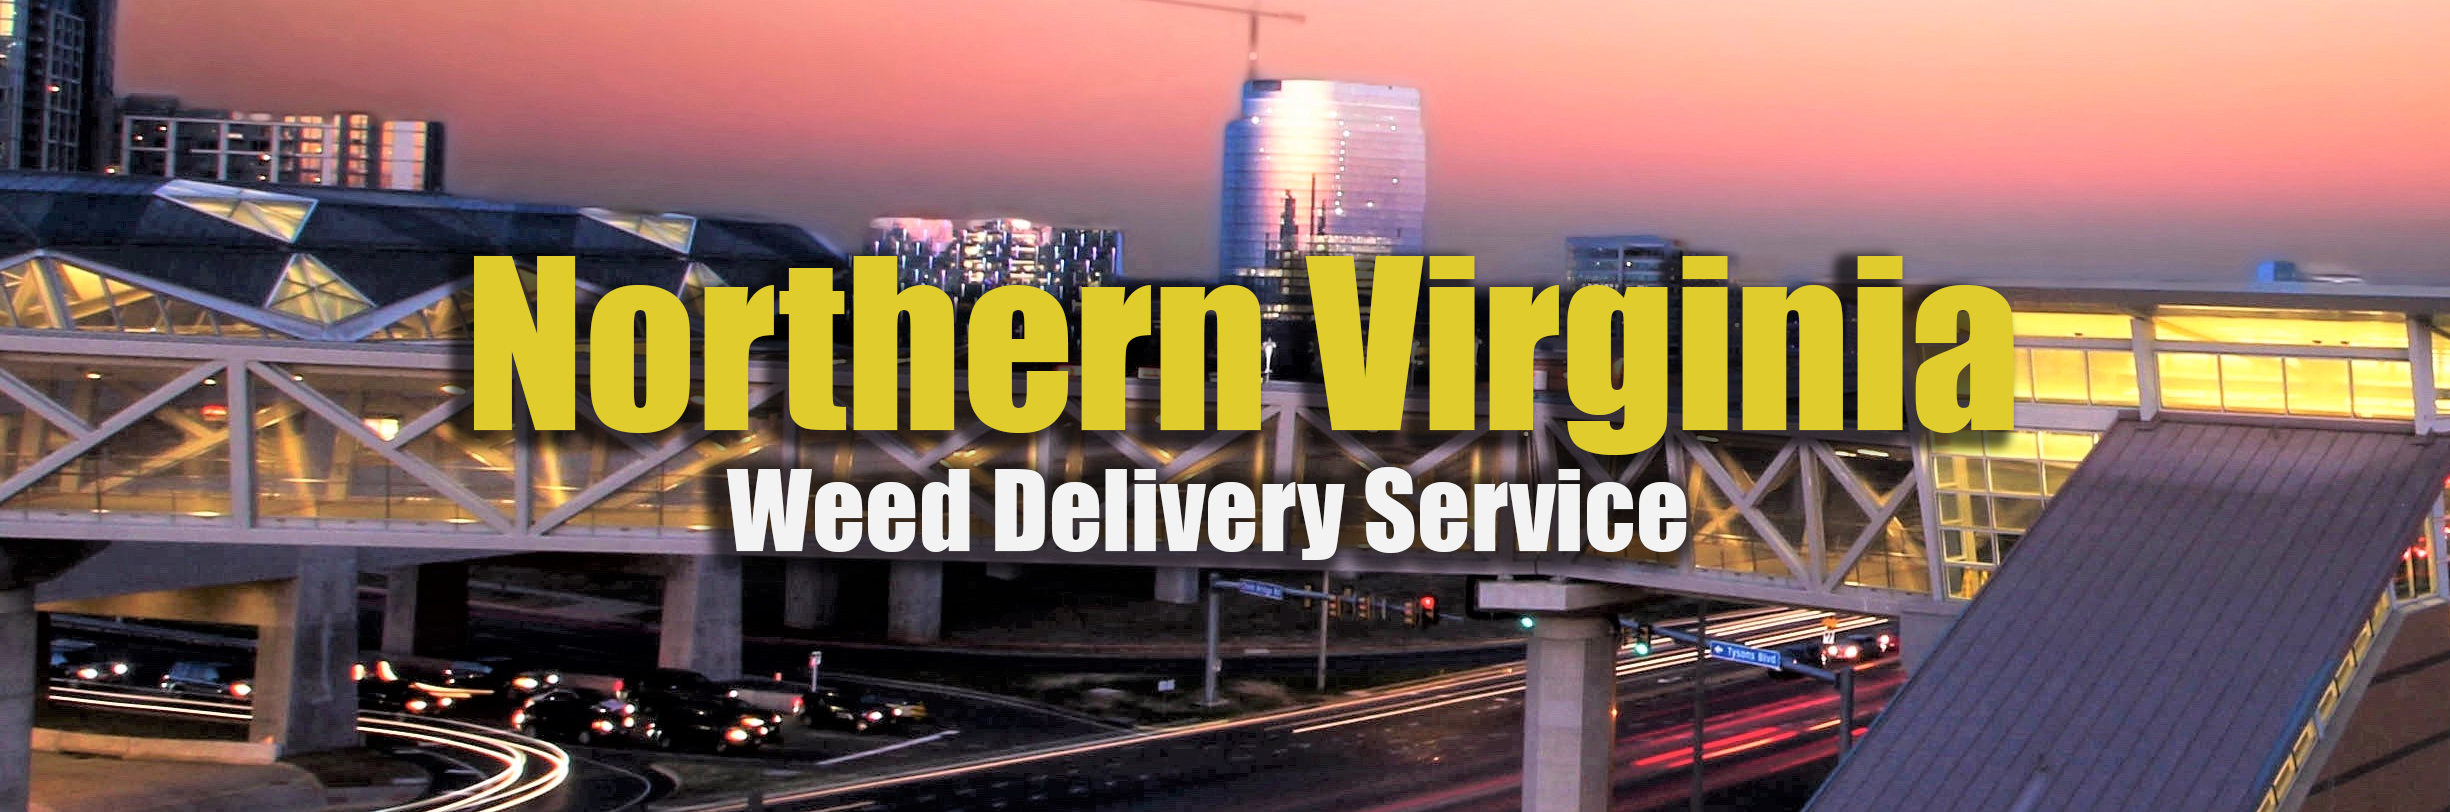 Northern Virginia weed delivery service